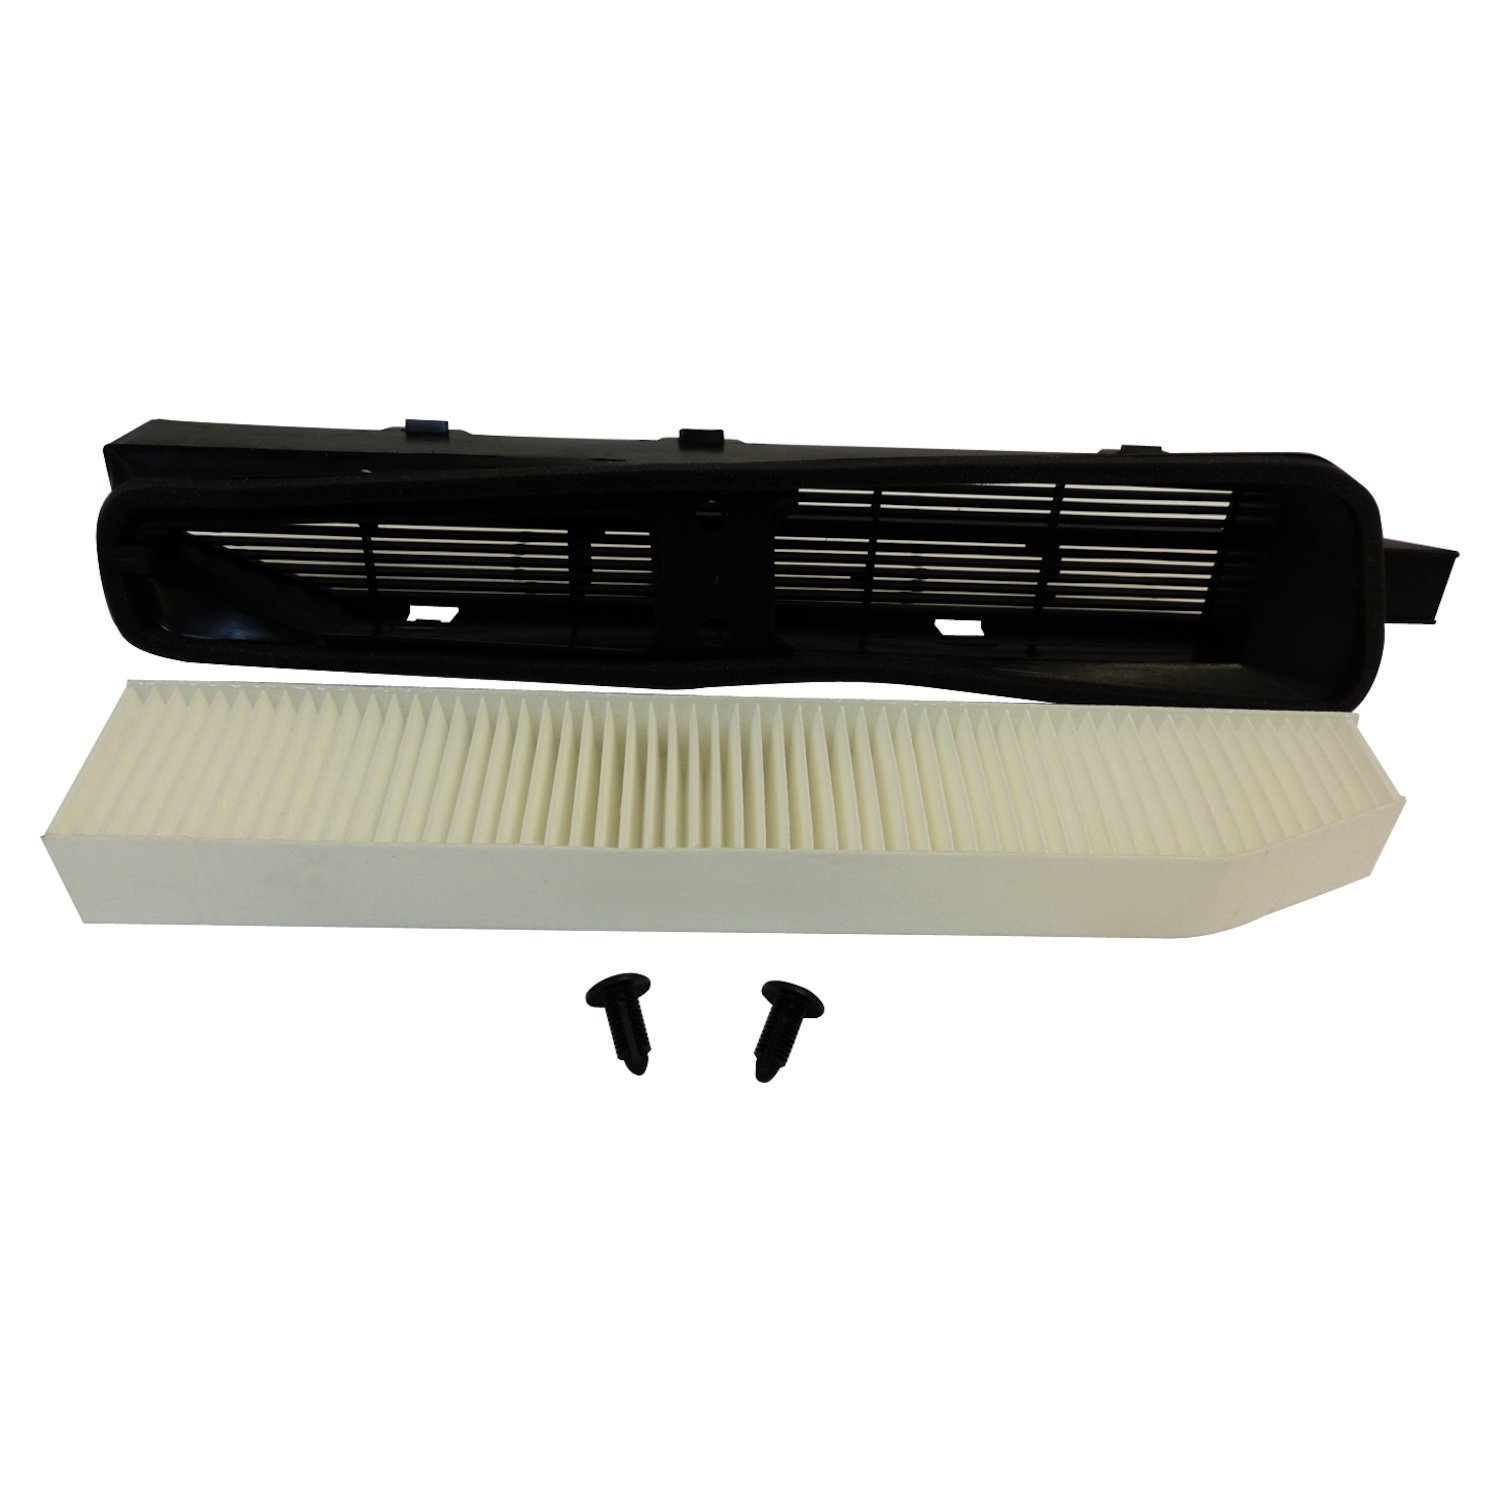 Cabin Air Filter Kit; Incl. Cabin Air Filter/Filter Housing; Adds Cabin Air Filter To Ducts;